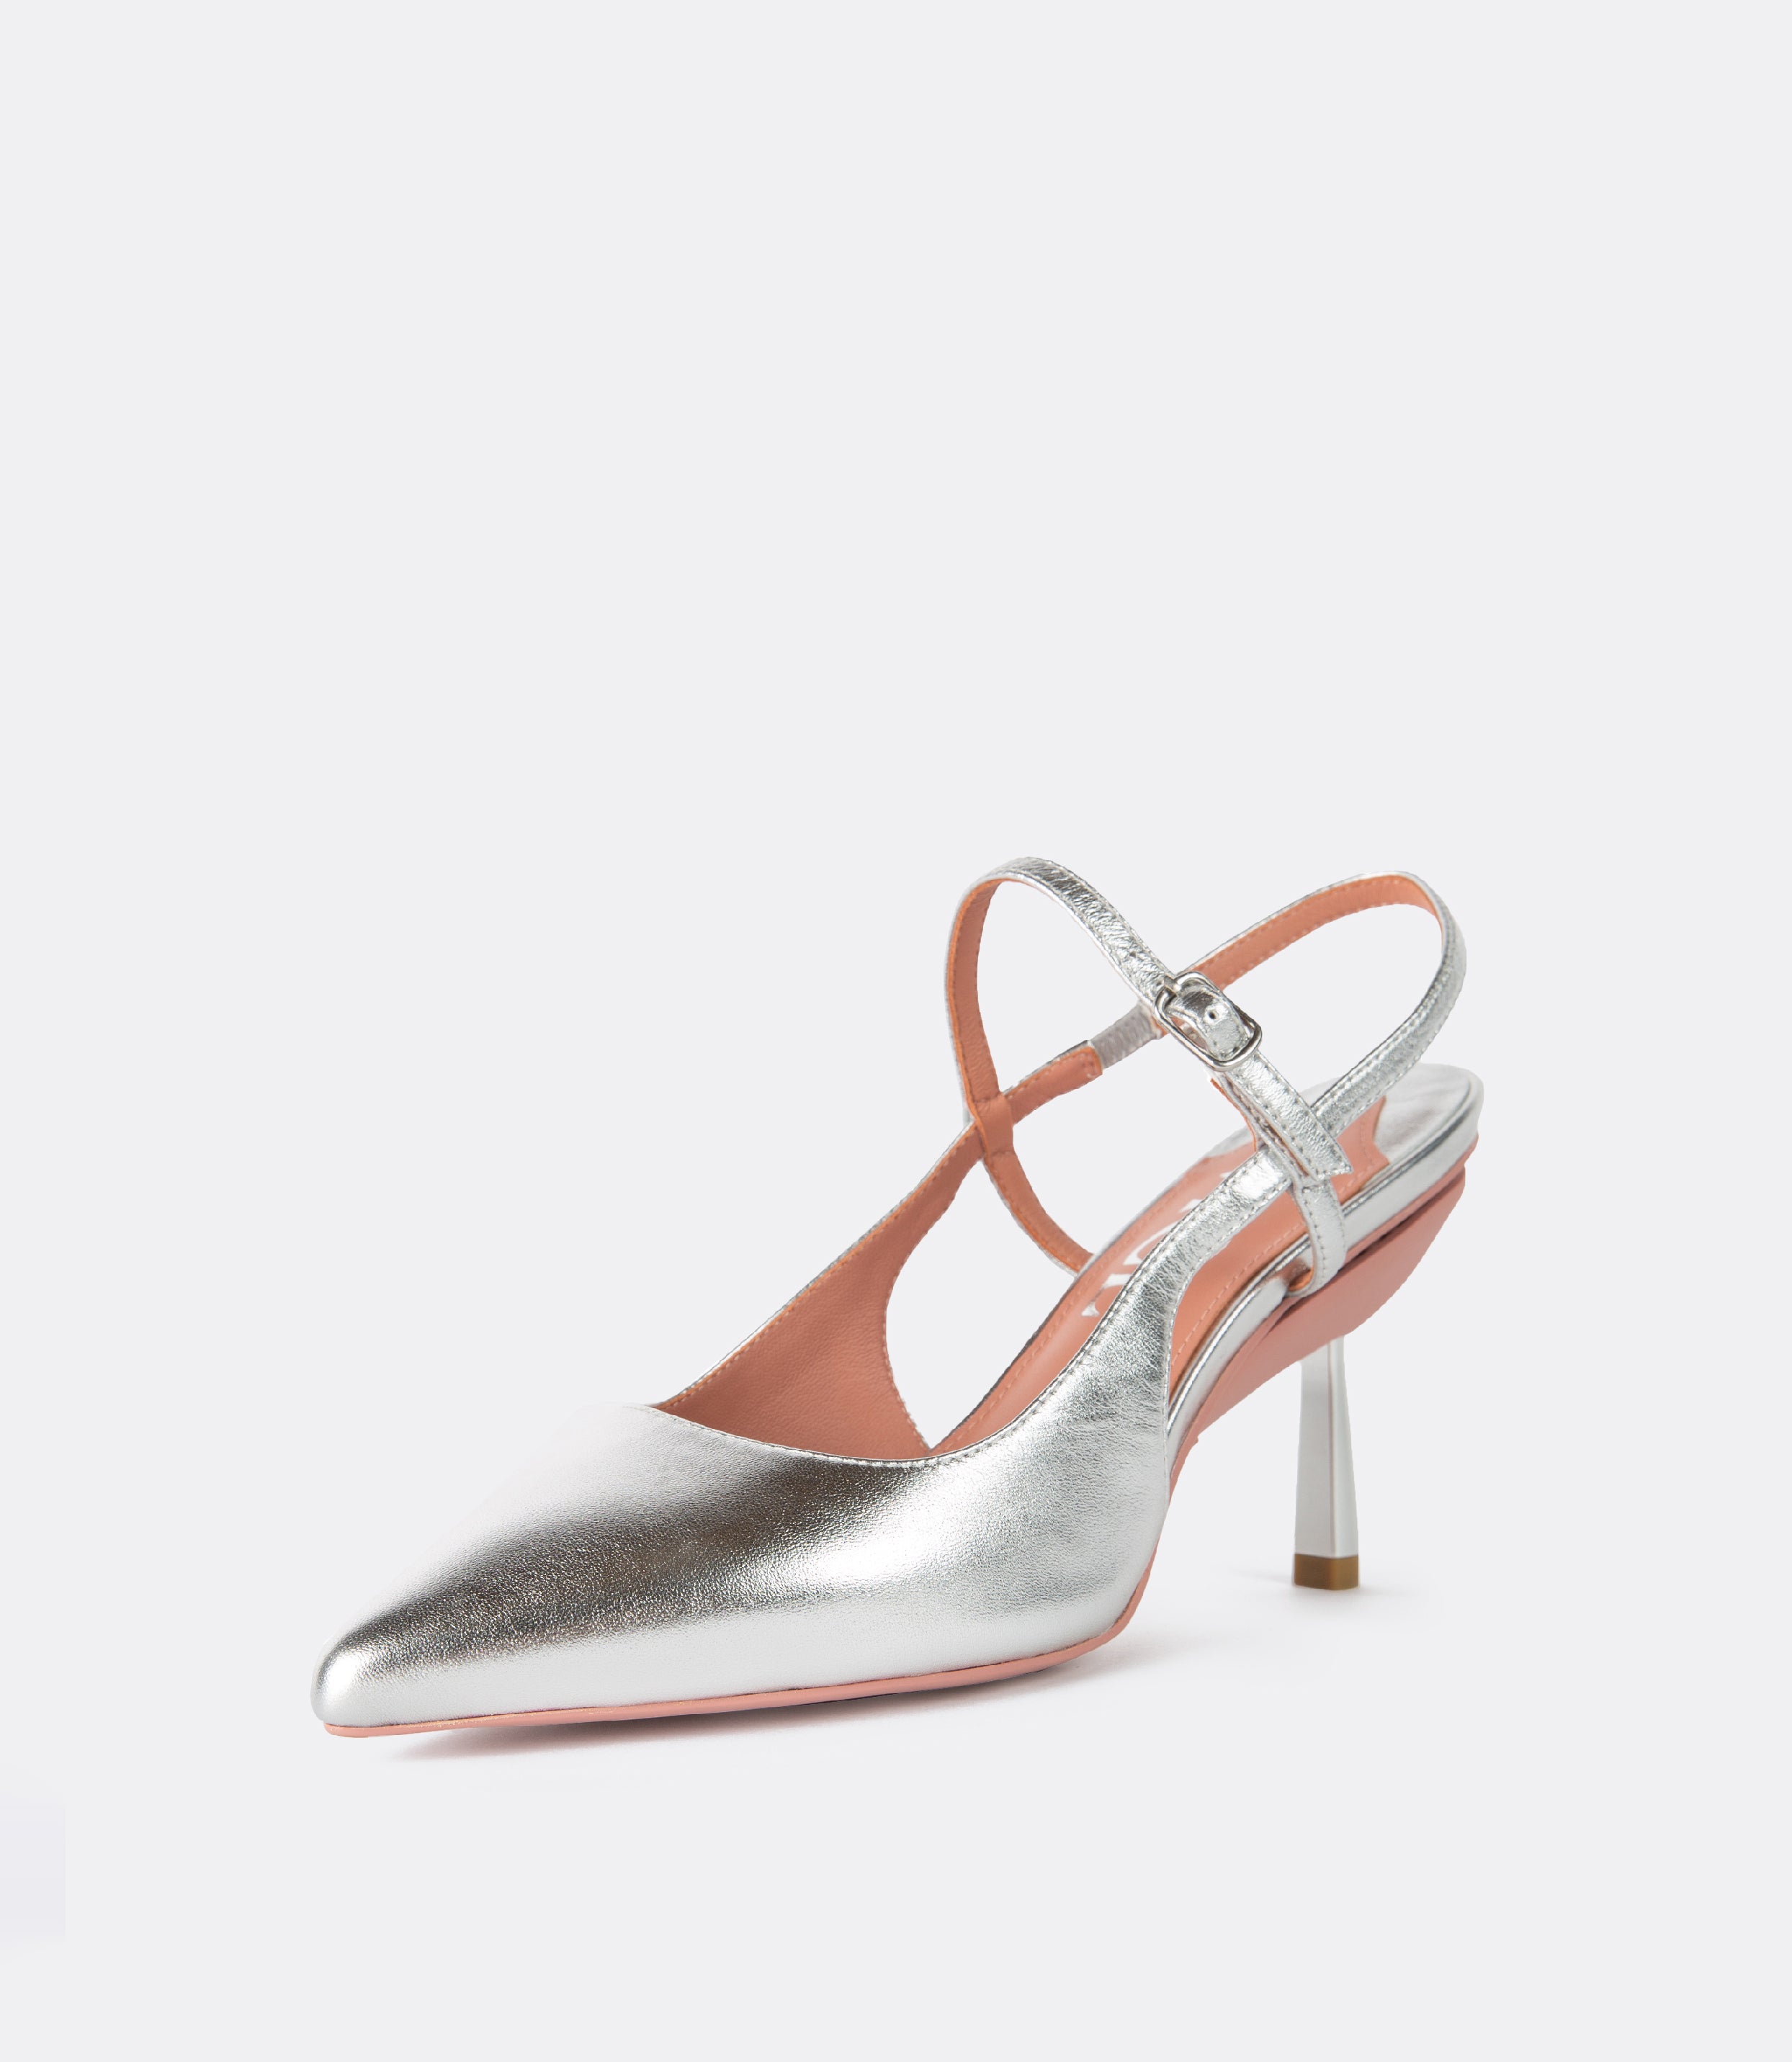 Front view of the silver buckle slingbacks as heels